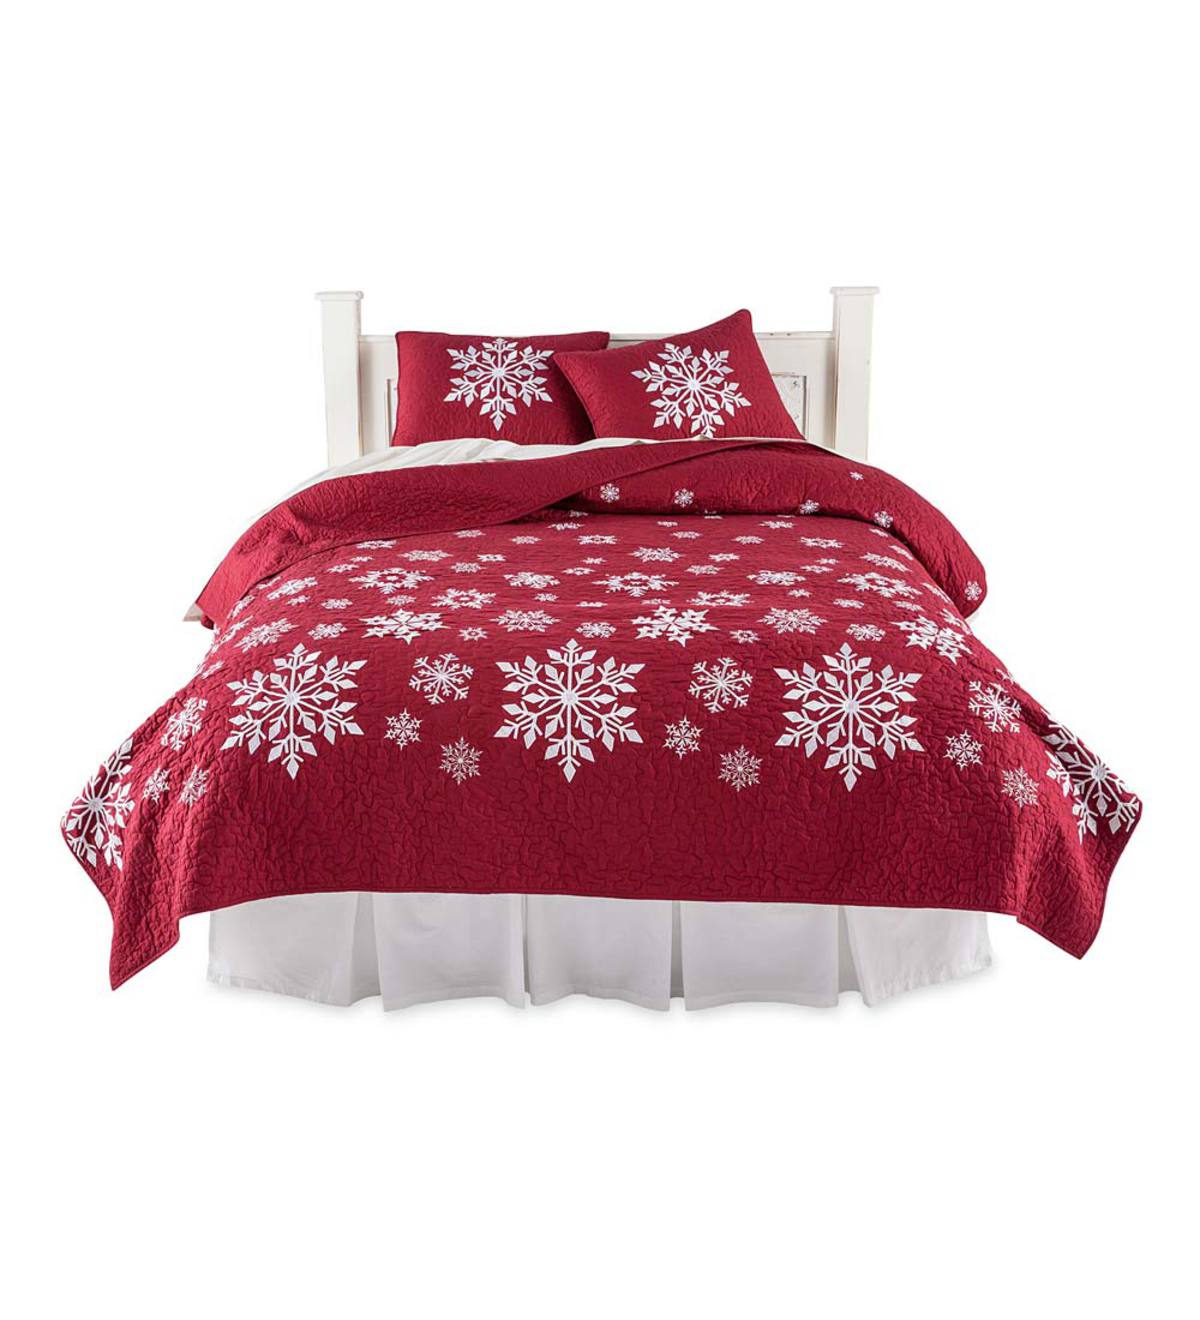 Falling Snow Embroidered Quilt Set, Snowflake Bedding King